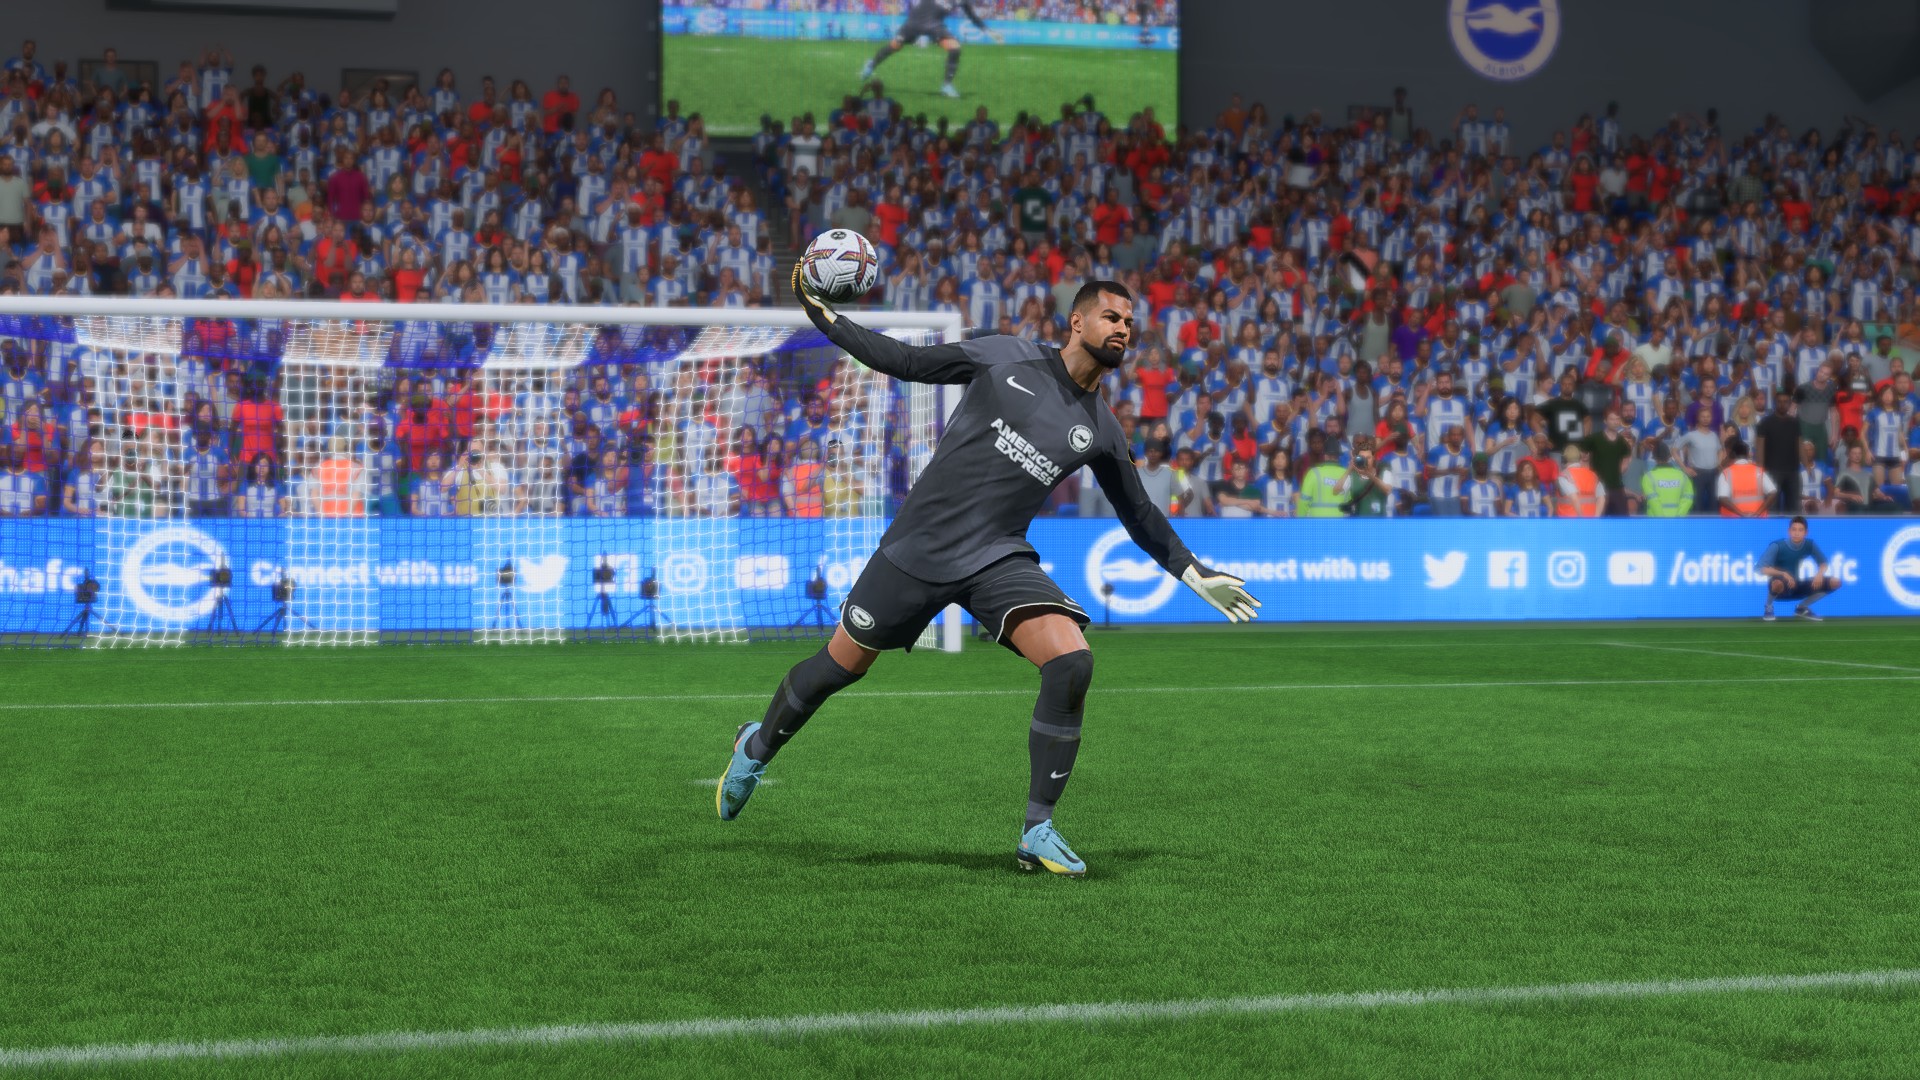 The best FIFA 23 goalkeepers to sign in career mode